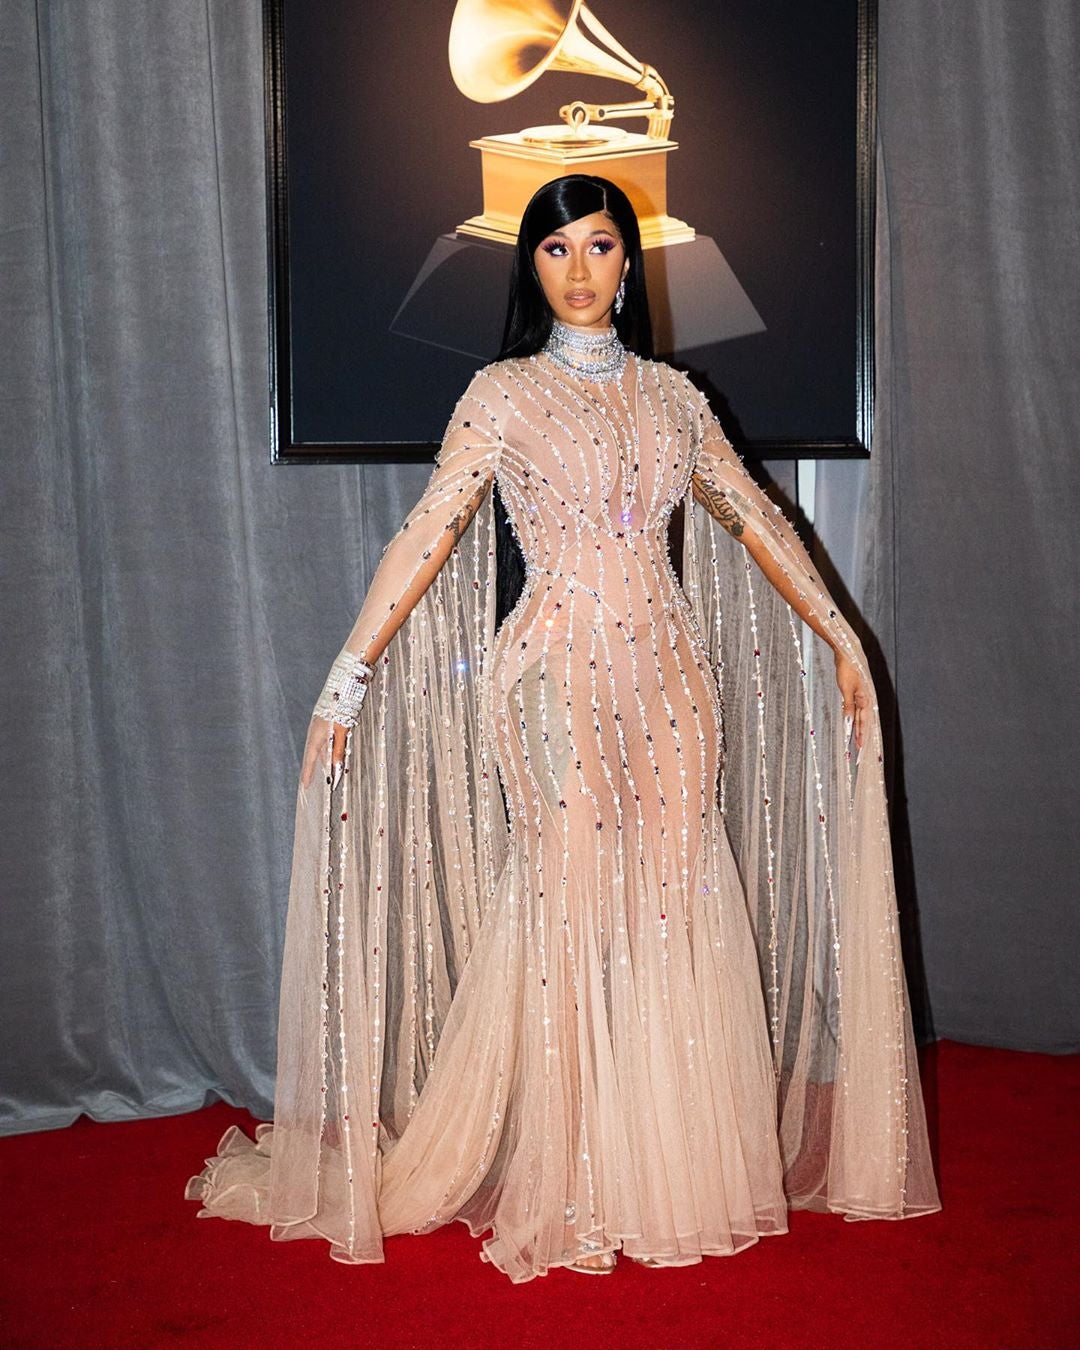 Cardi B Skipped The Grammys Red Carpet But Here's Her Look